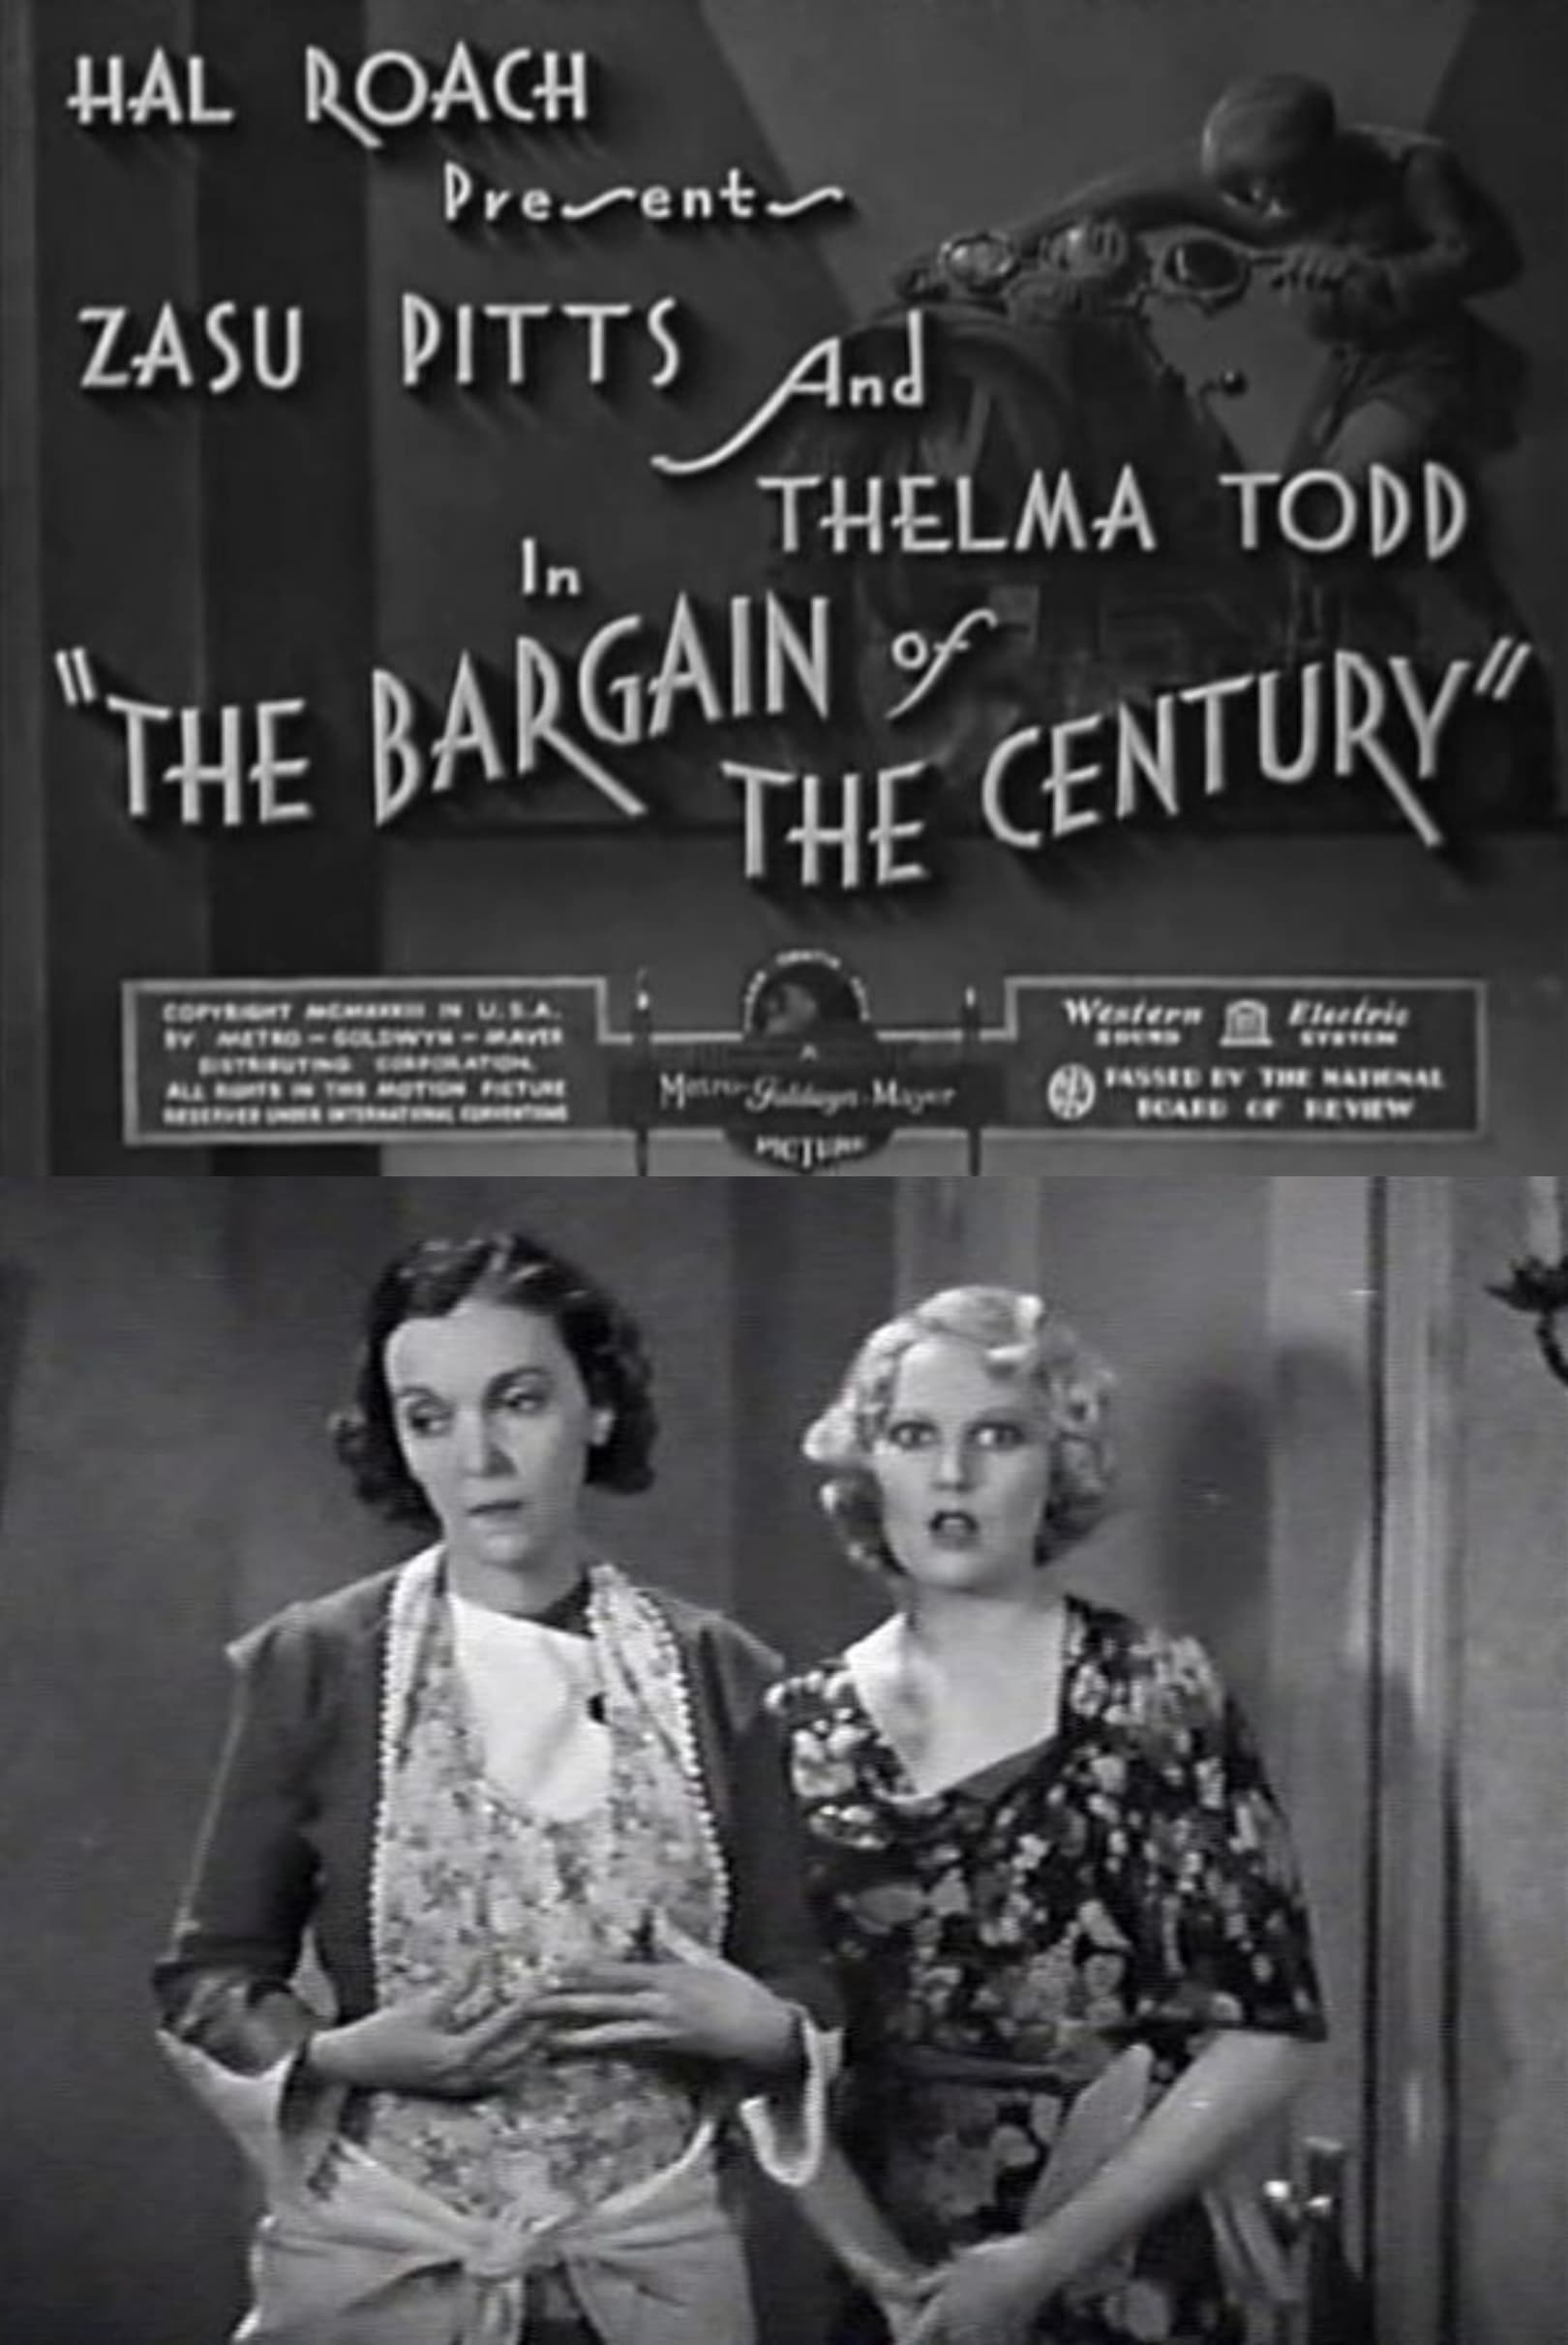 The Bargain of the Century (1933)